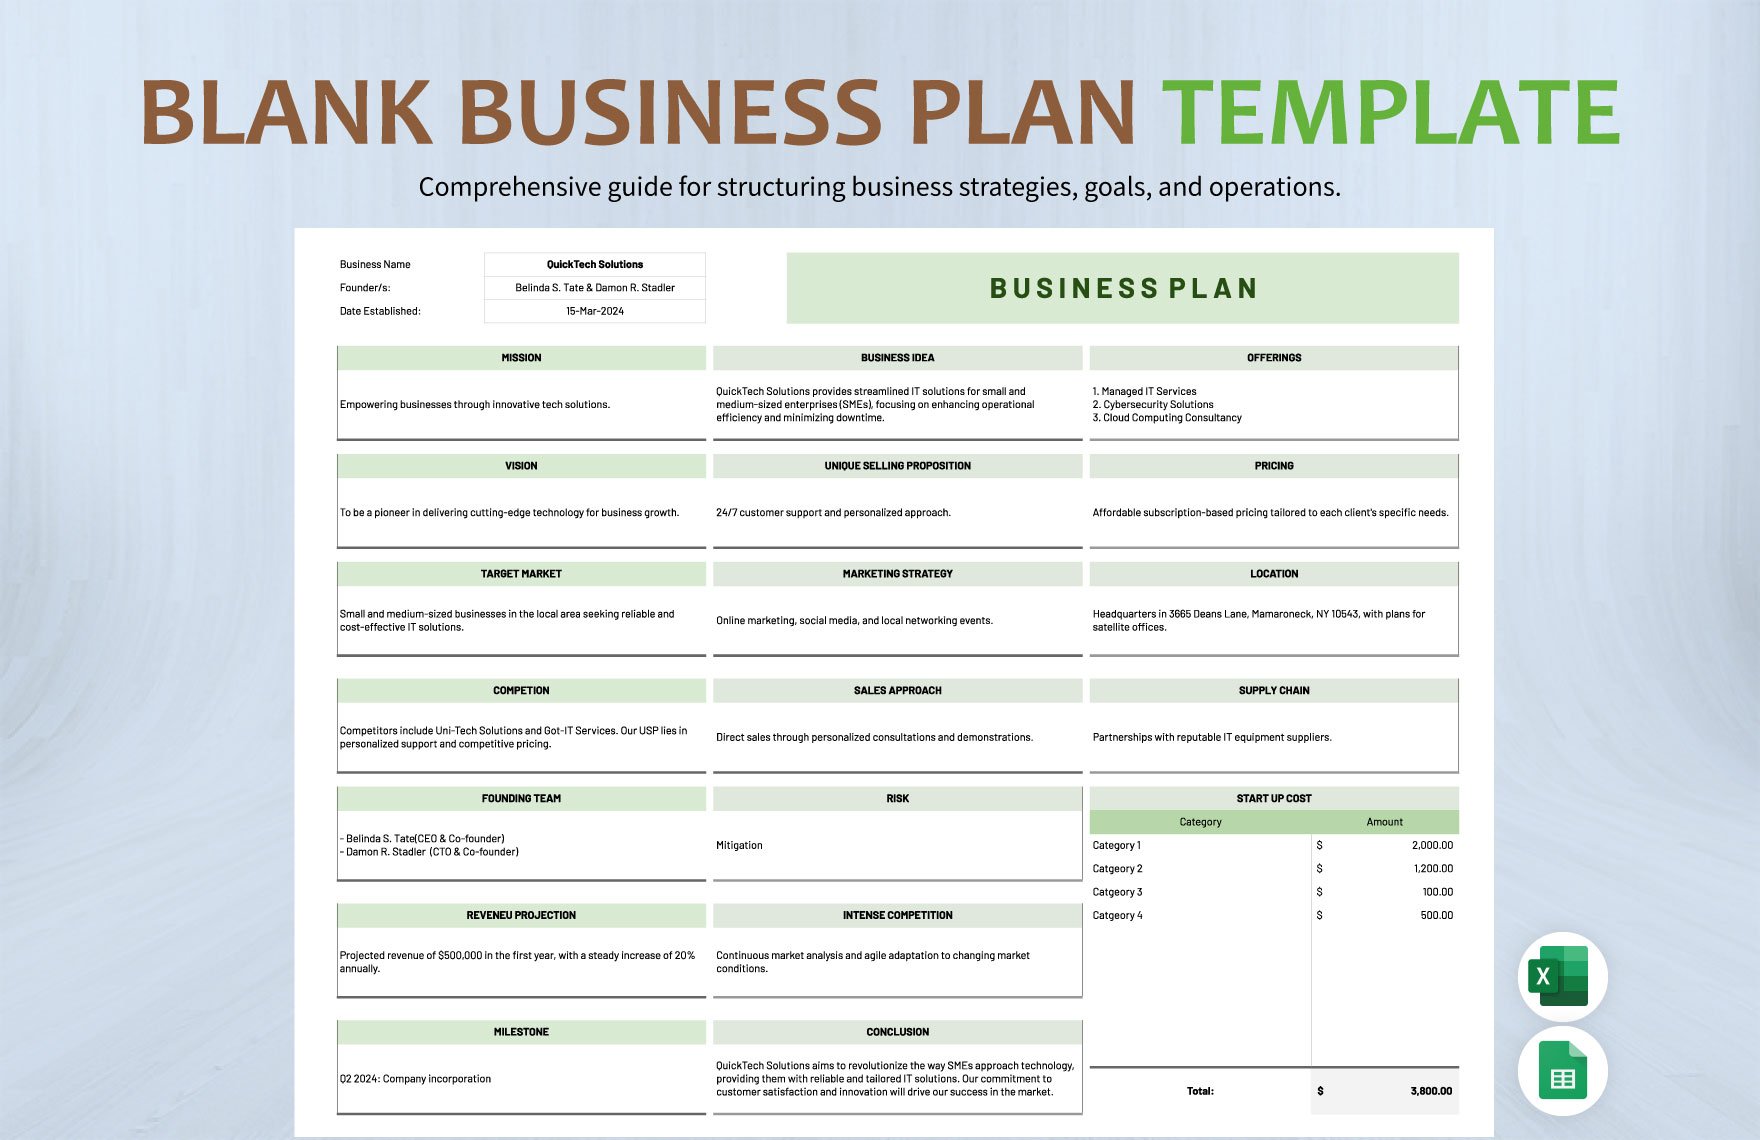 Blank Business Plan Template in Excel, Google Sheets